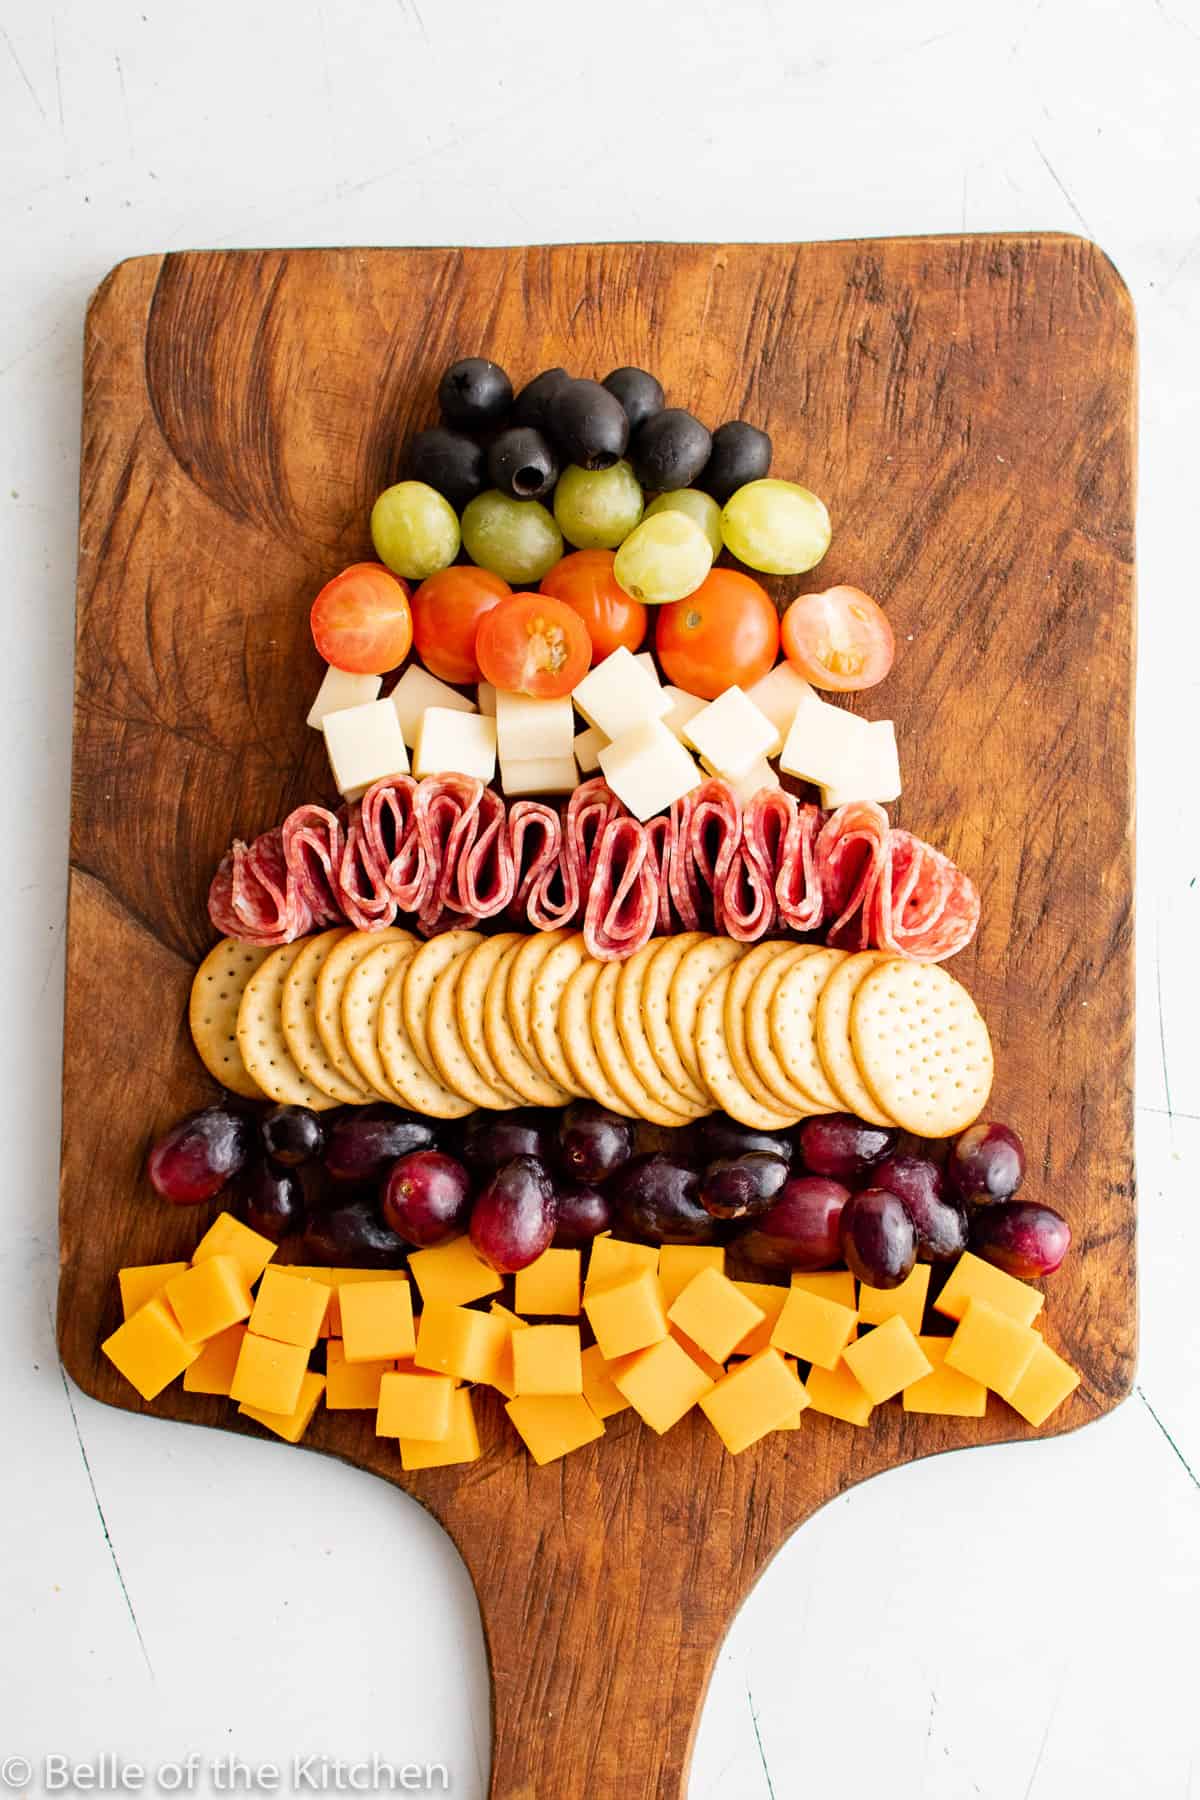 cut up cheese cubes, grapes, crackers, tomatoes, olives, and salami on a wooden cutting board.